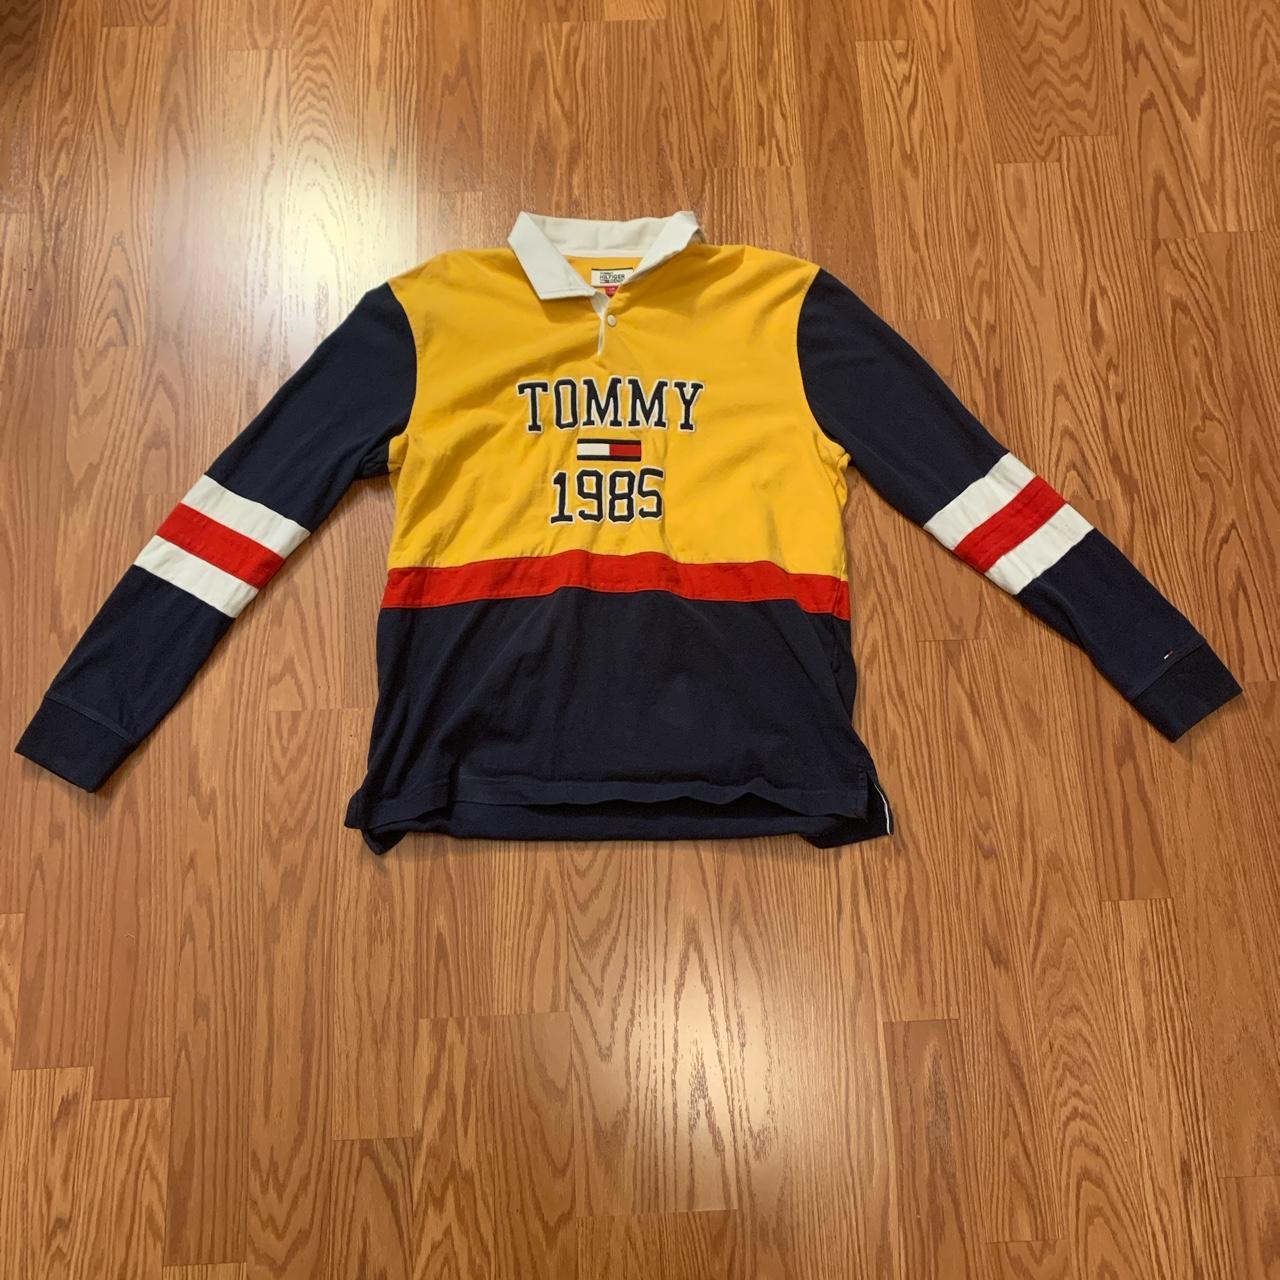 Vintage Tommy Hilfiger rugby shirt in yellow, red... - Depop